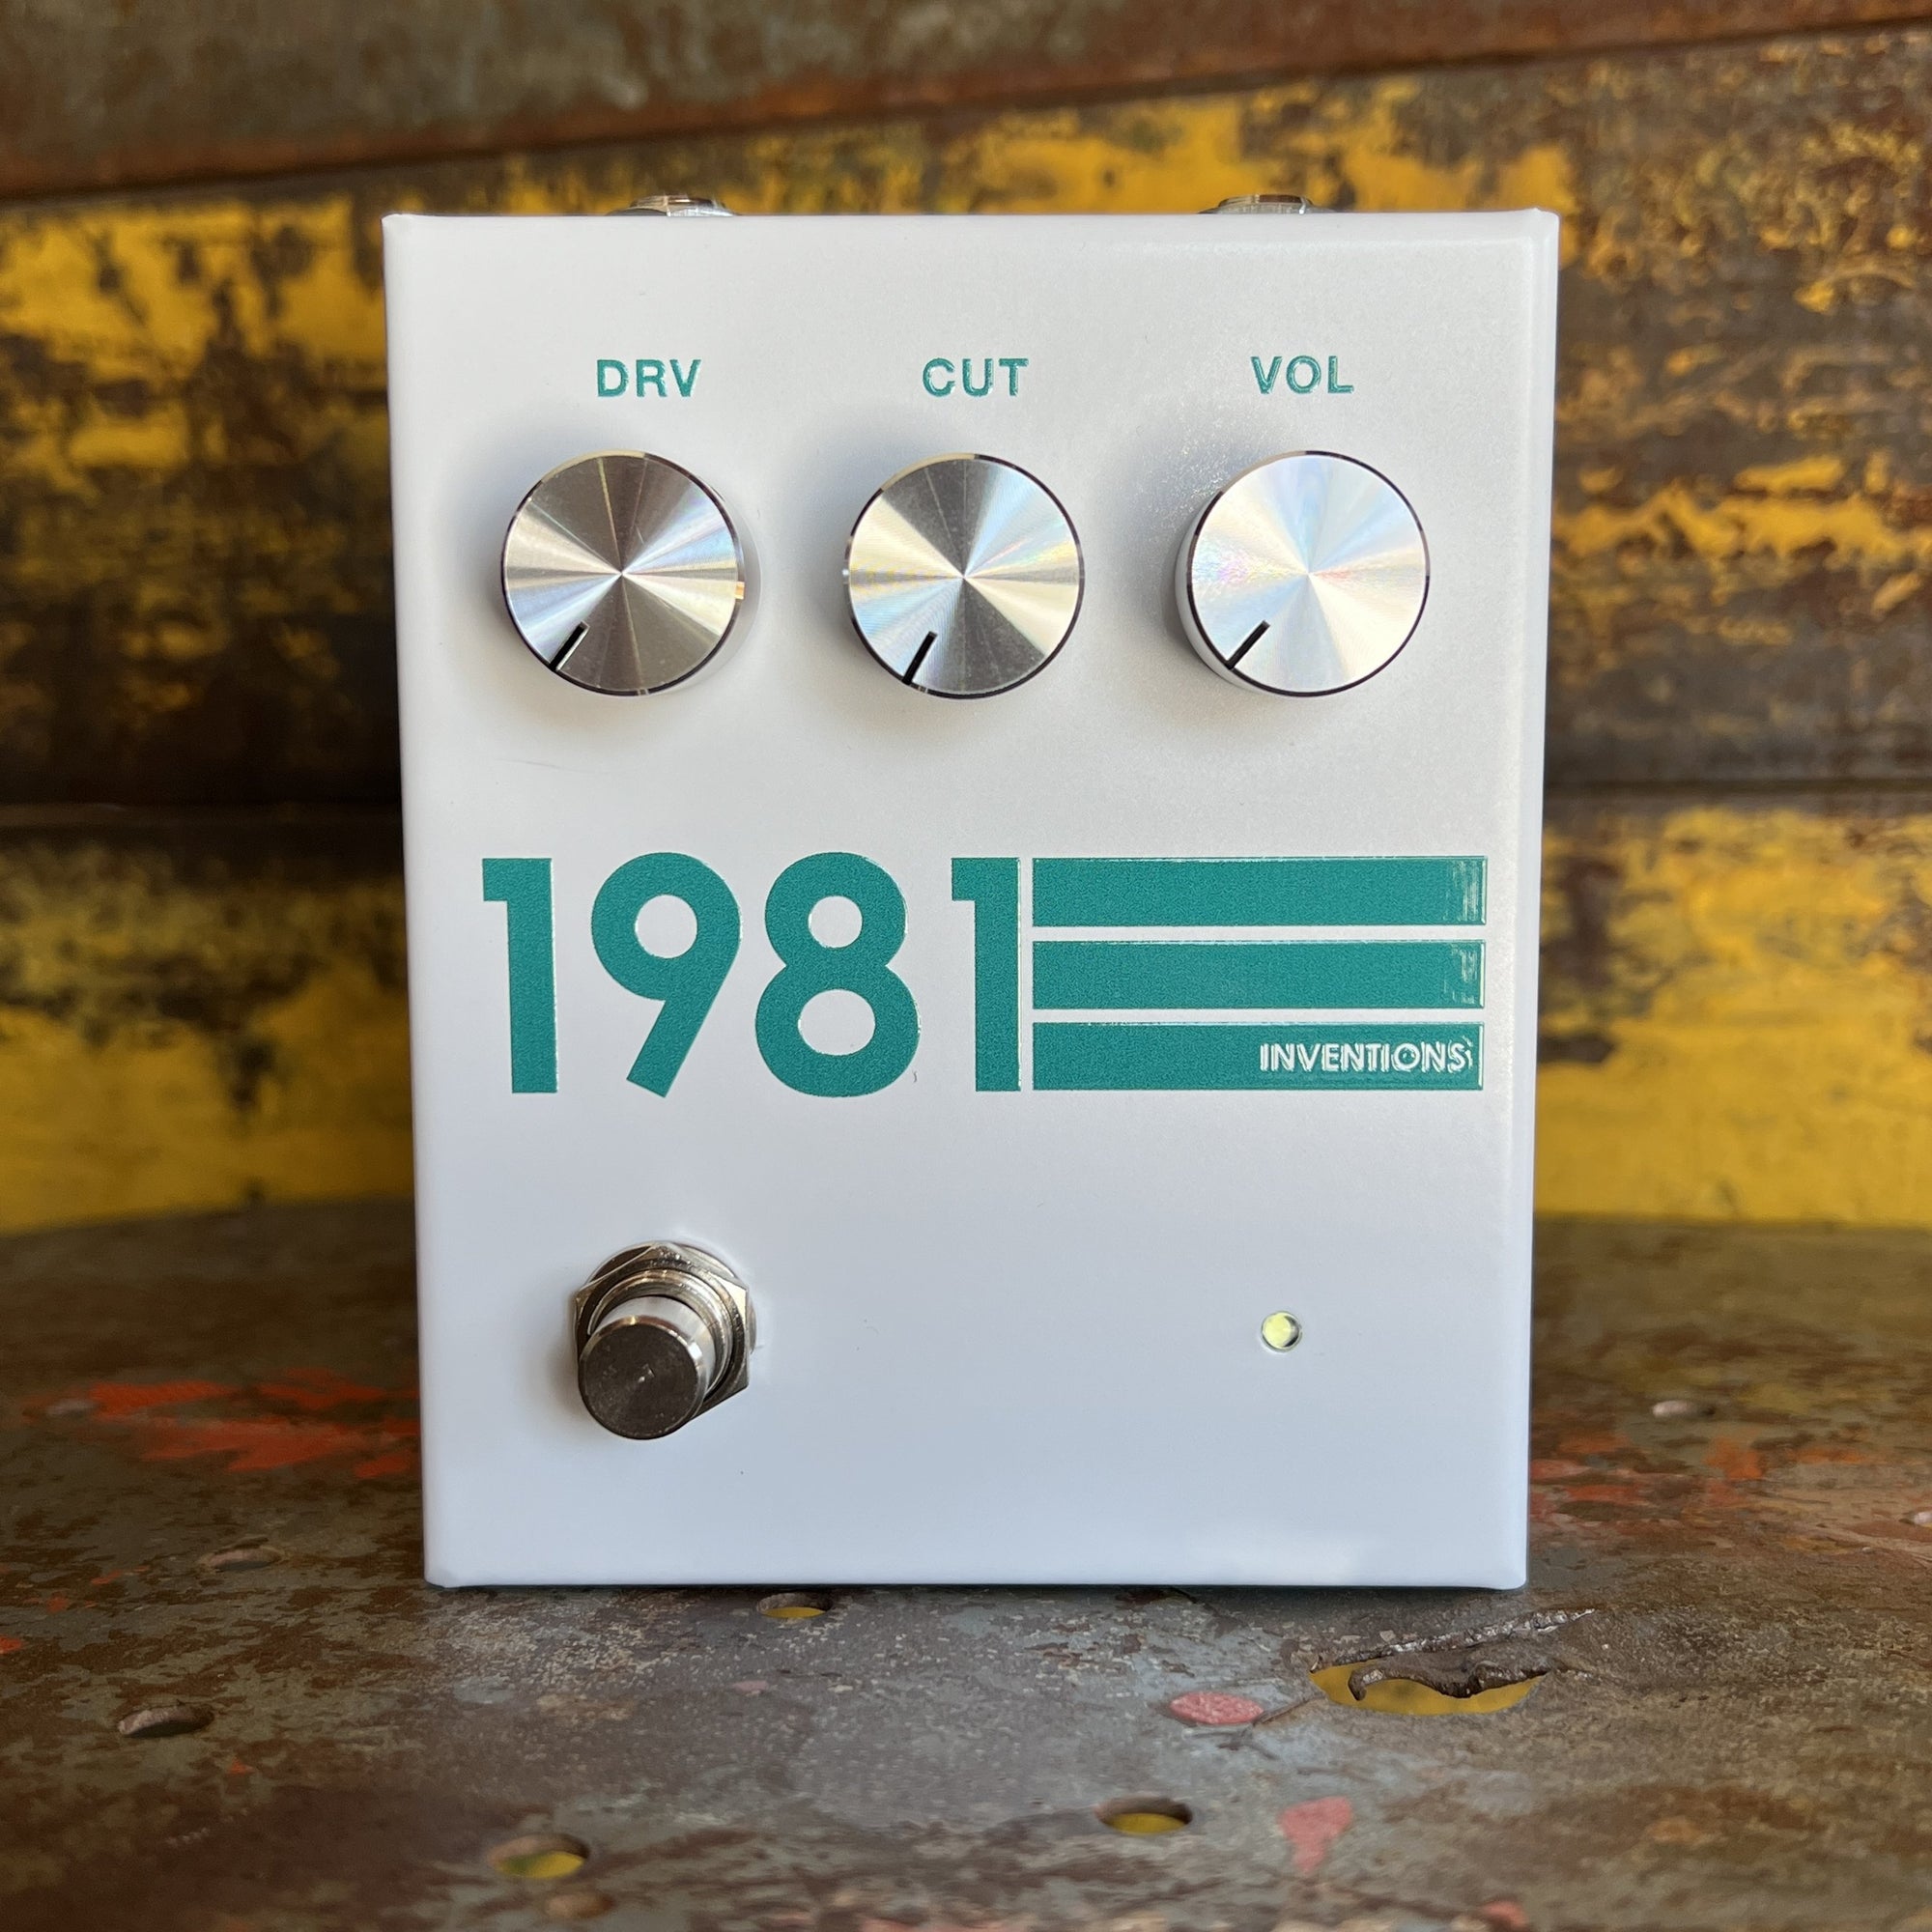 1981 Inventions DRV White / Teal